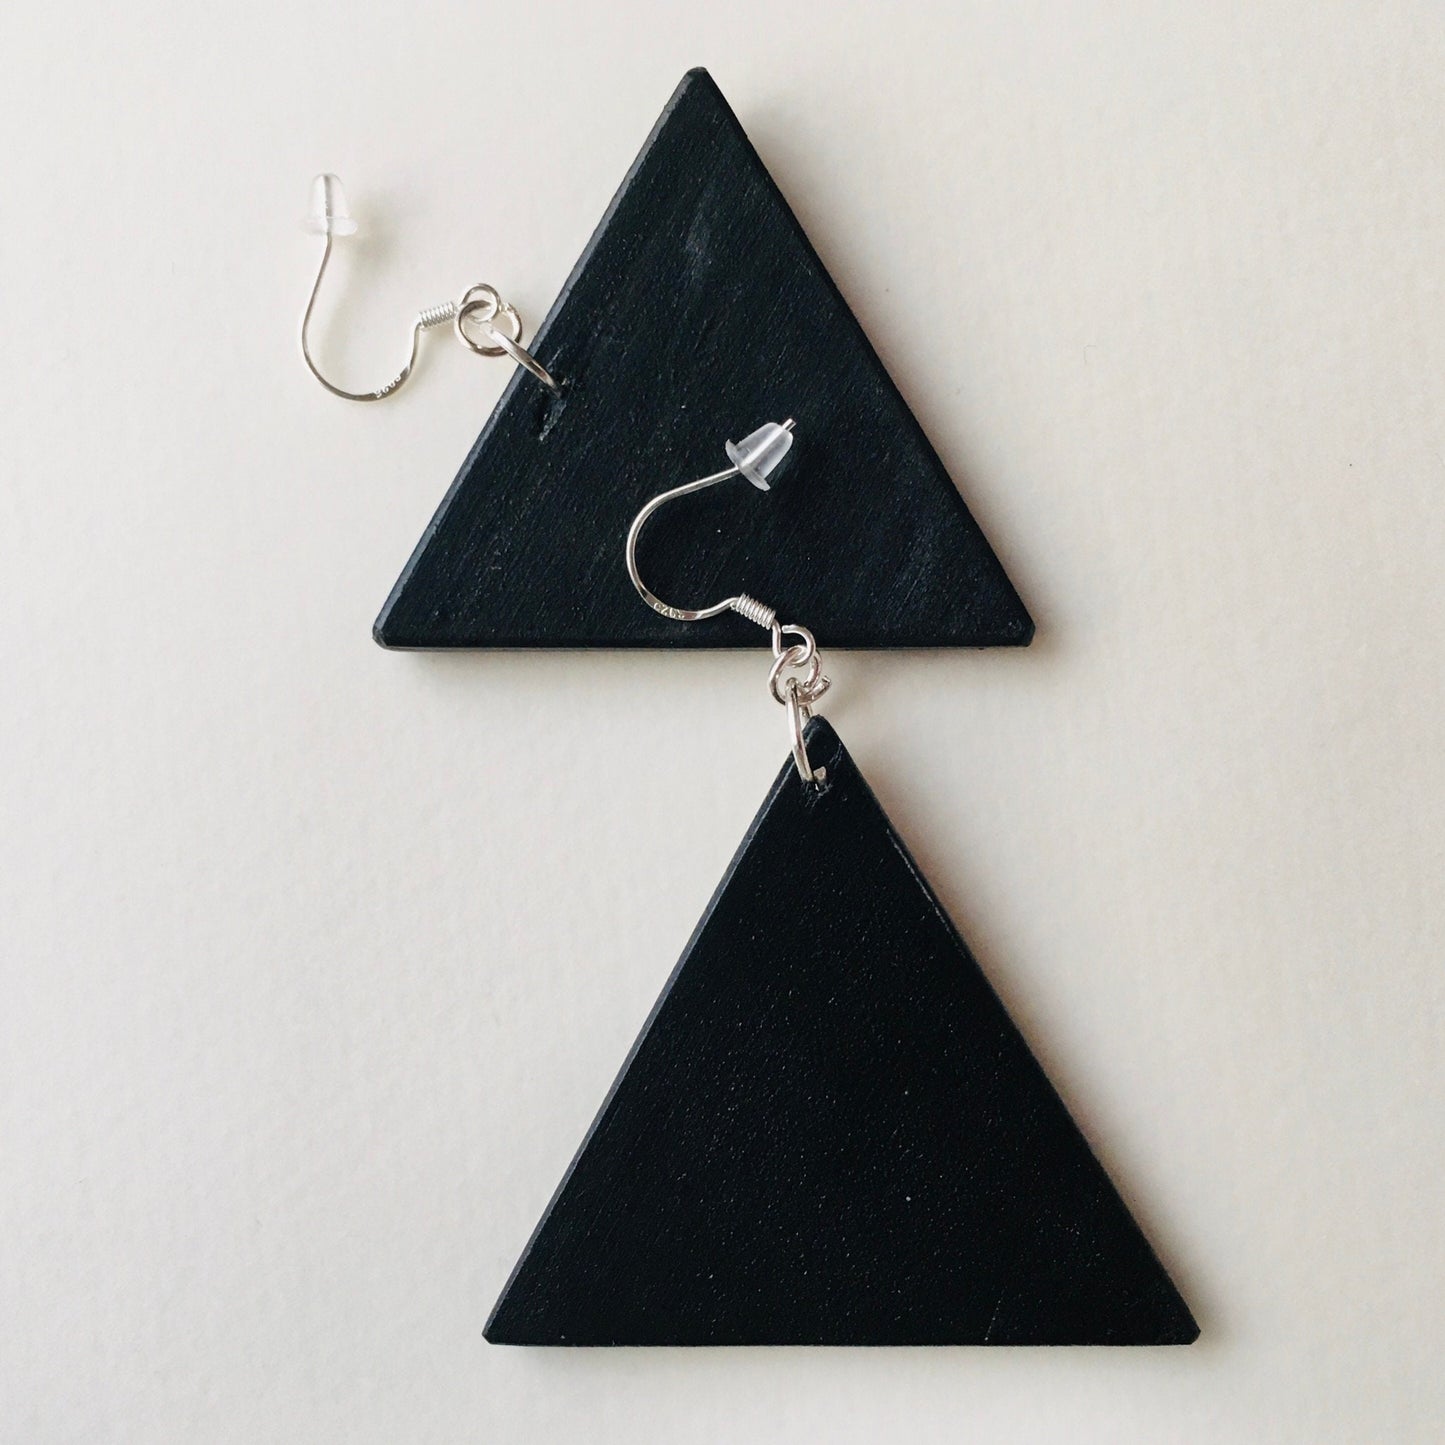 bach side in black of these wood earrings with sterlin silver hooks created  by Obljewellery shop.